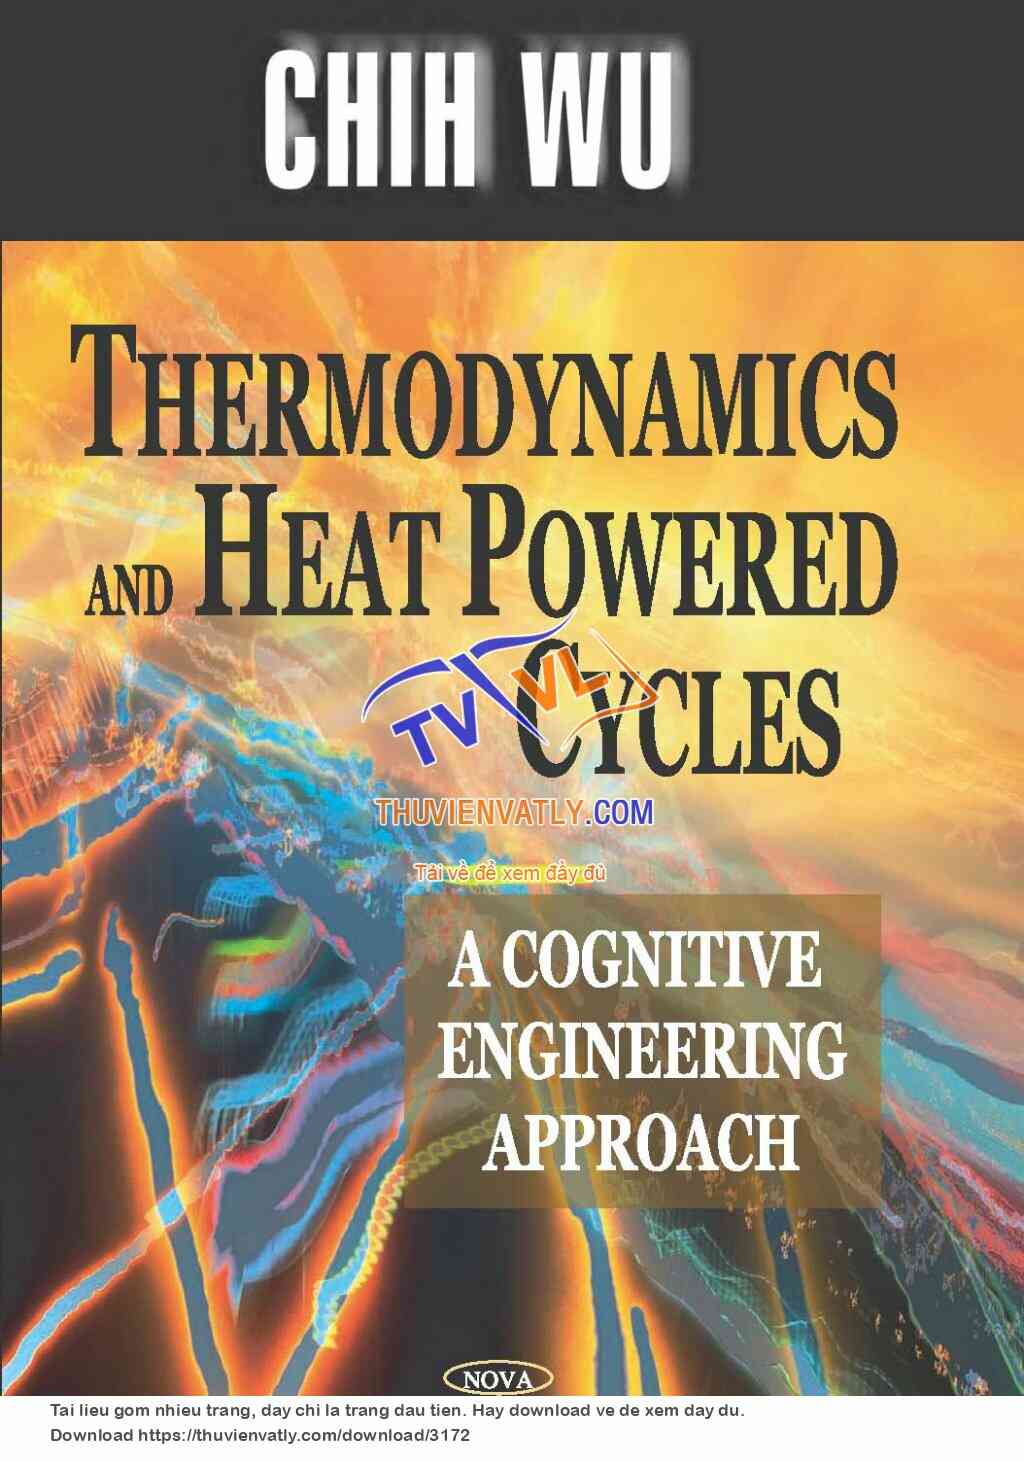 Thermodynamics and Heat Powered Cycles